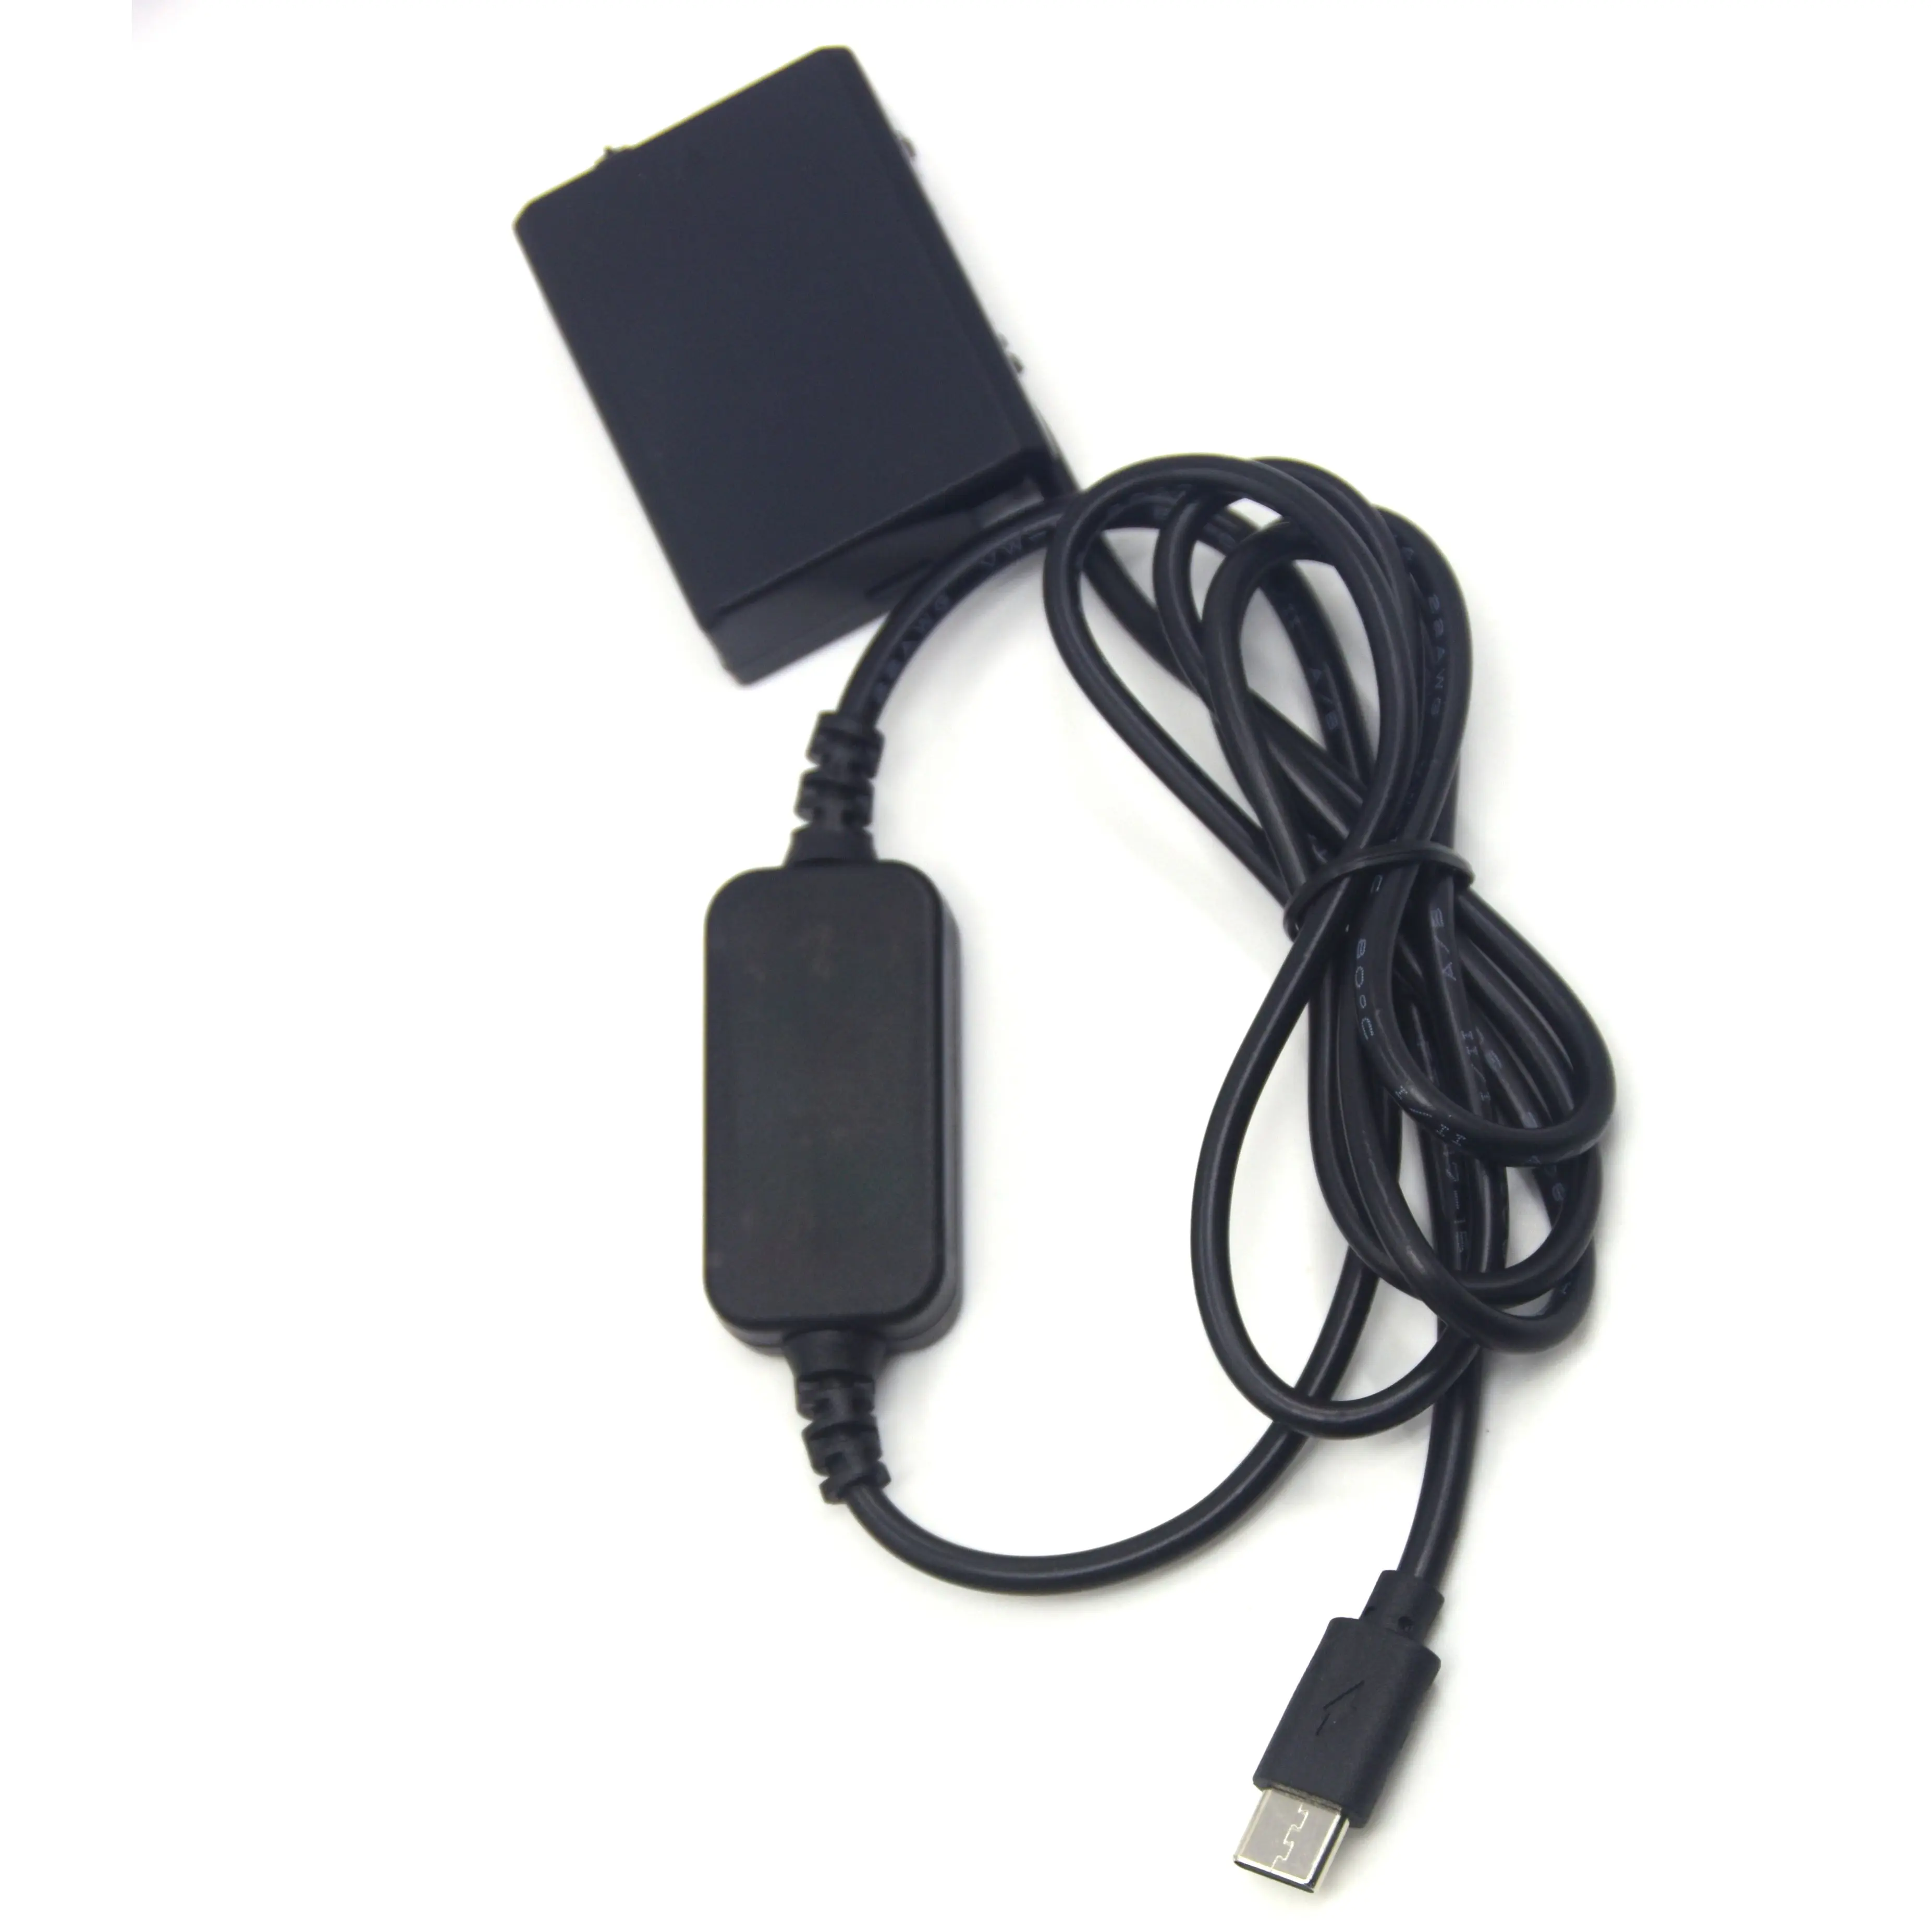 

LP E5 Dummy Battery DR-E5 Coupler+USB to DC Power Cable for Canon EOS Rebel XS XSi T1i 450D 500D Kiss F X2 X3 Cameras